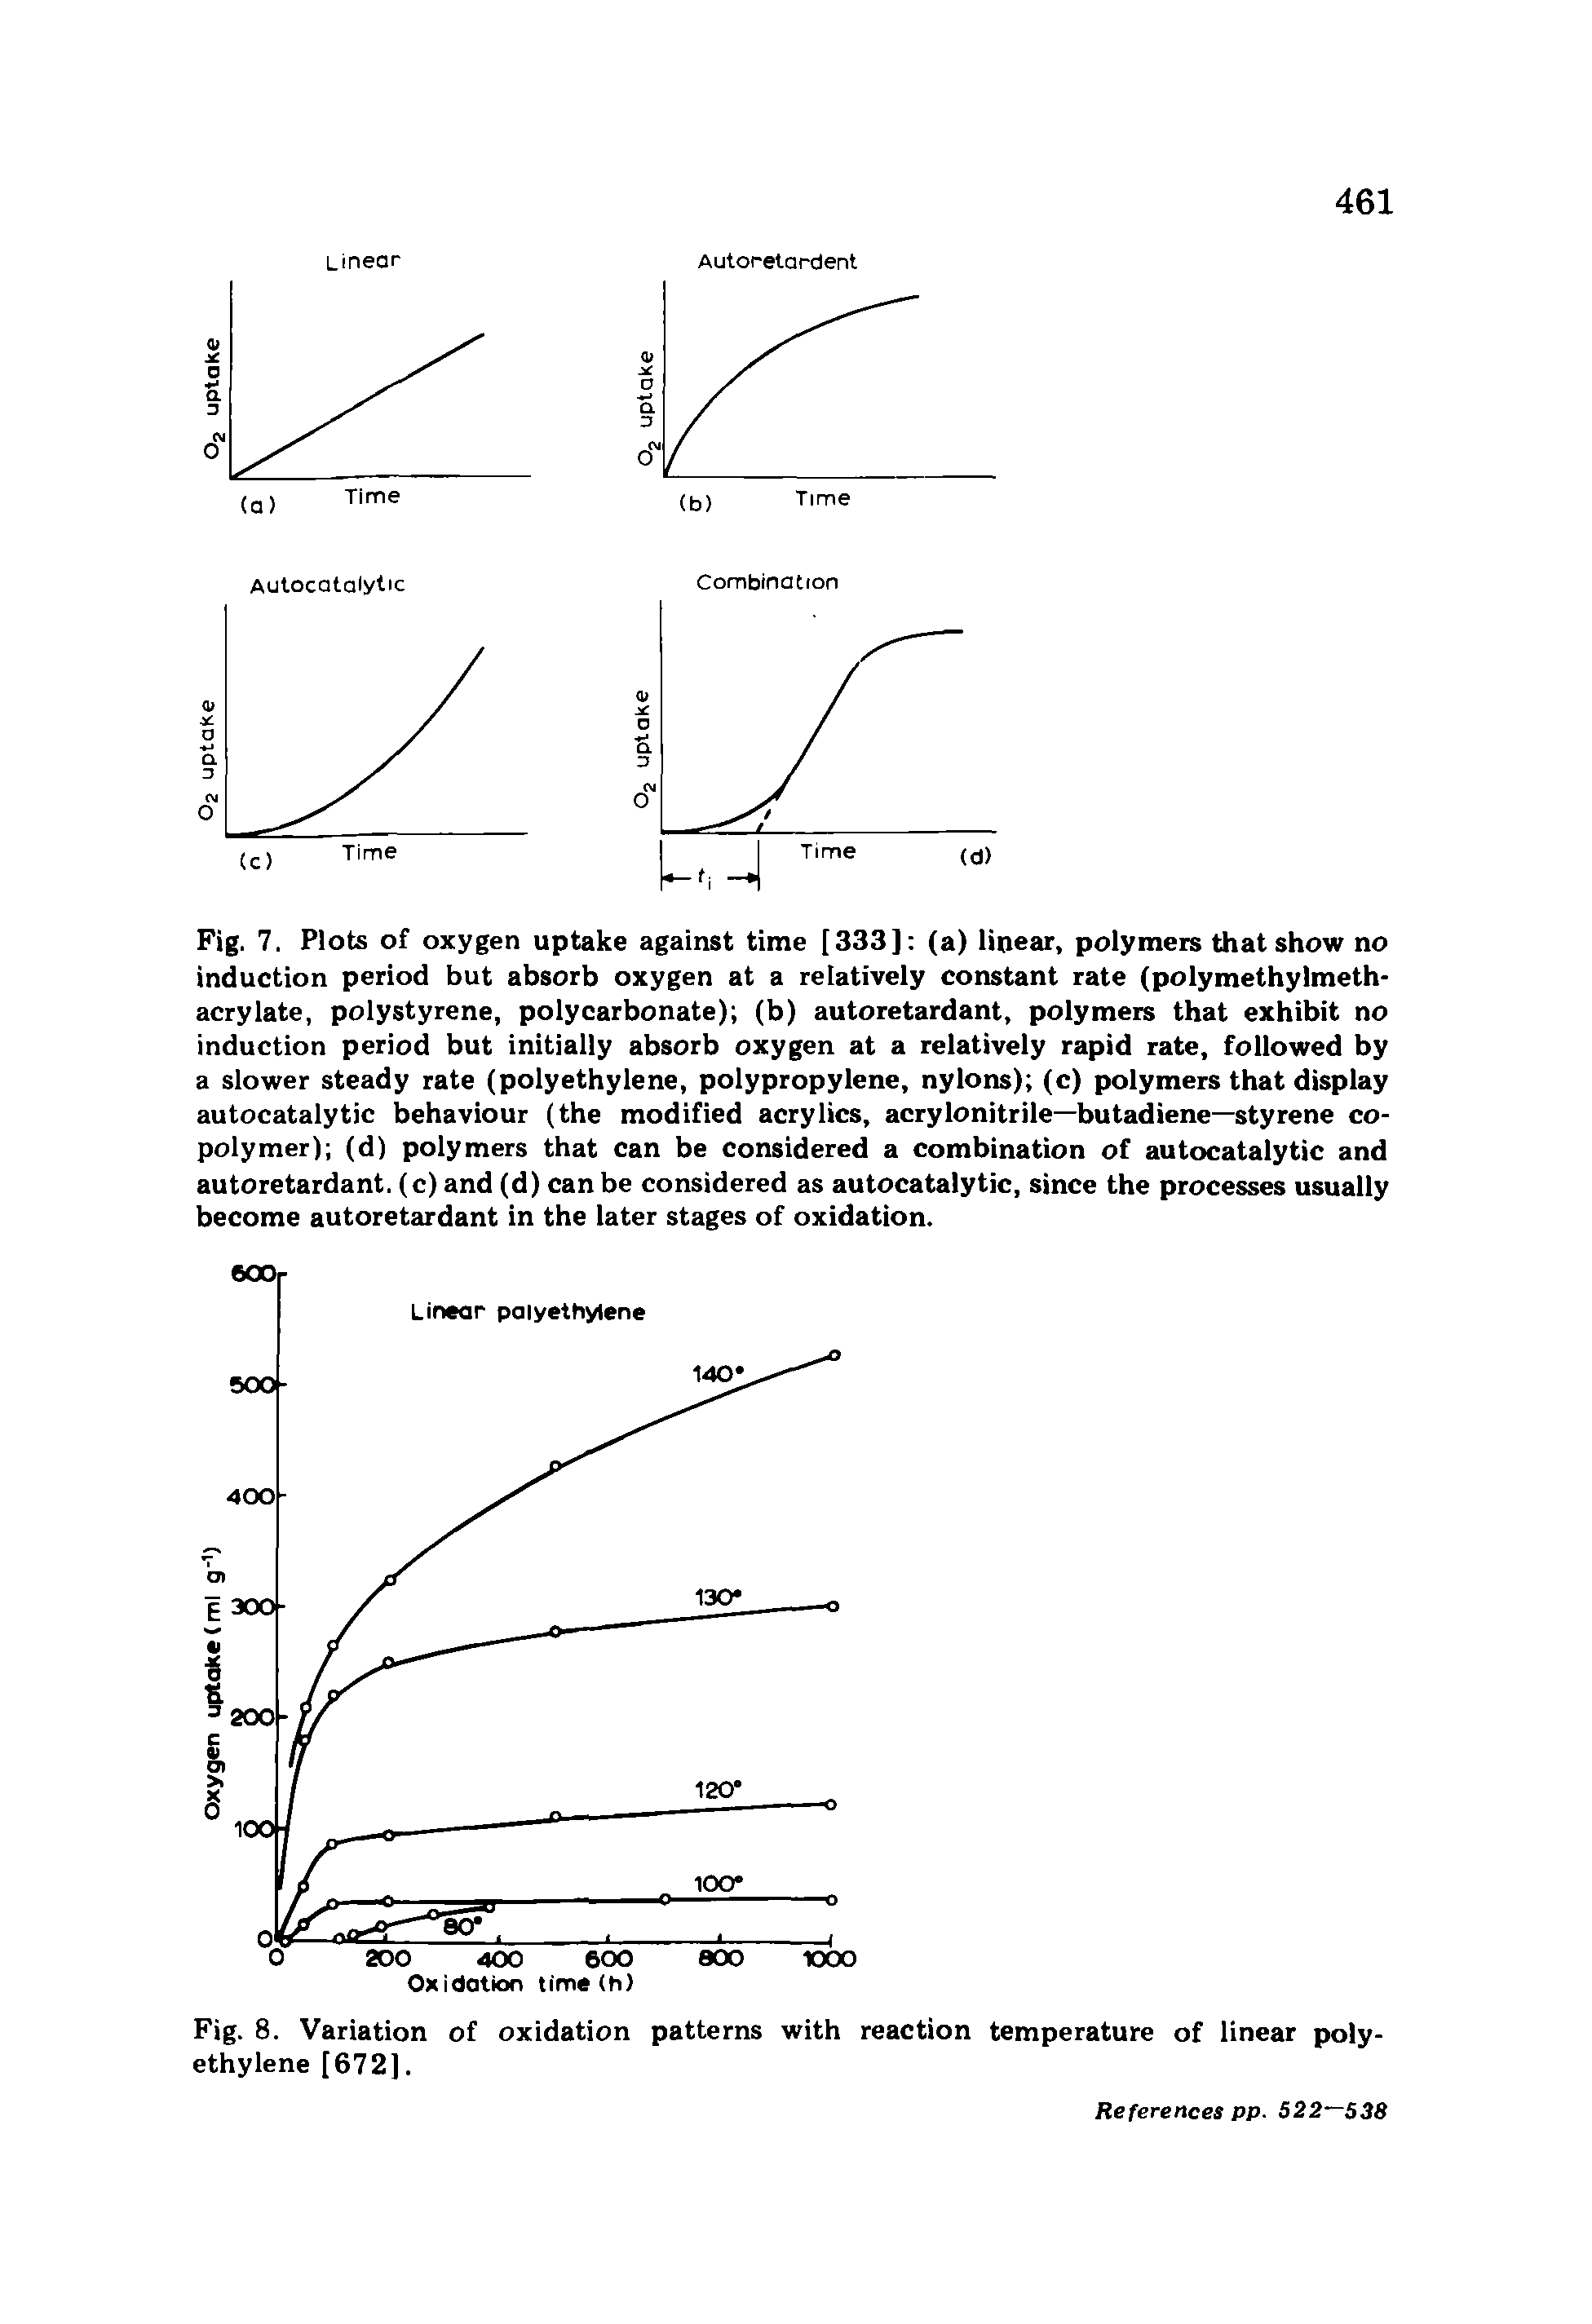 Fig. 7. Plots of oxygen uptake against time [333] (a) linear, polymers that show no induction period but absorb oxygen at a relatively constant rate (polymethylmethacrylate, polystyrene, polycarbonate) (b) autoretardant, polymers that exhibit no induction period but initially absorb oxygen at a relatively rapid rate, followed by a slower steady rate (polyethylene, polypropylene, nylons) (c) polymers that display autocatalytic behaviour (the modified acrylics, acrylonitrile—butadiene—styrene copolymer) (d) polymers that can be considered a combination of autocatalytic and autoretardant, (c) and (d) can be considered as autocatalytic, since the processes usually become autoretardant in the later stages of oxidation.